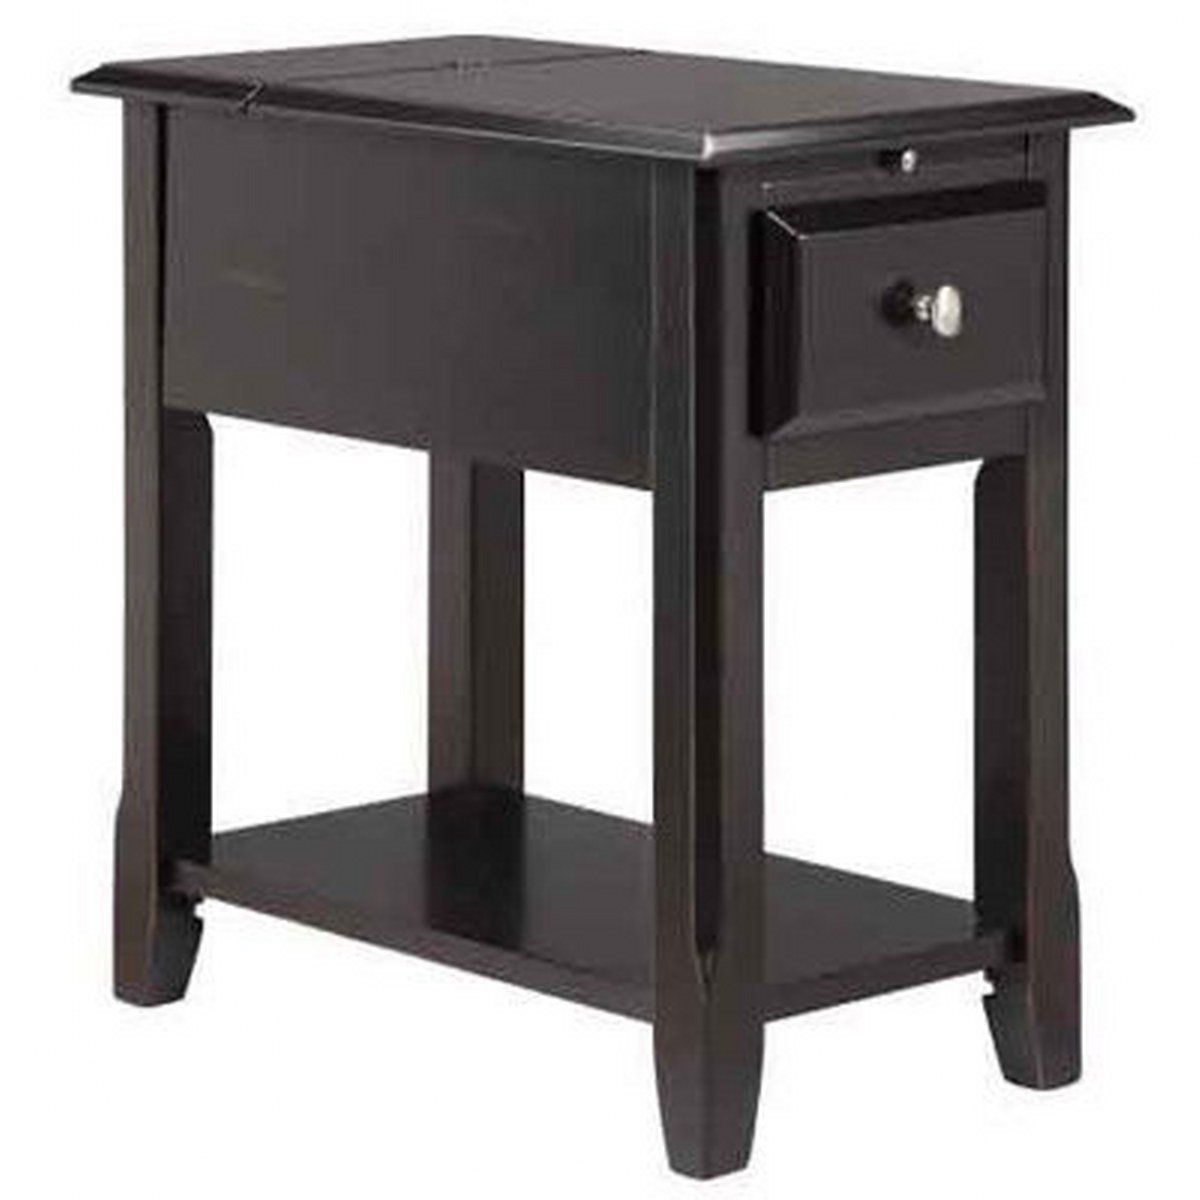 modern style narrow nightstand rectangle wooden black chairsider accent table with storage utility tray and drawer side sofa antique ese lamps white round pedestal farm door end